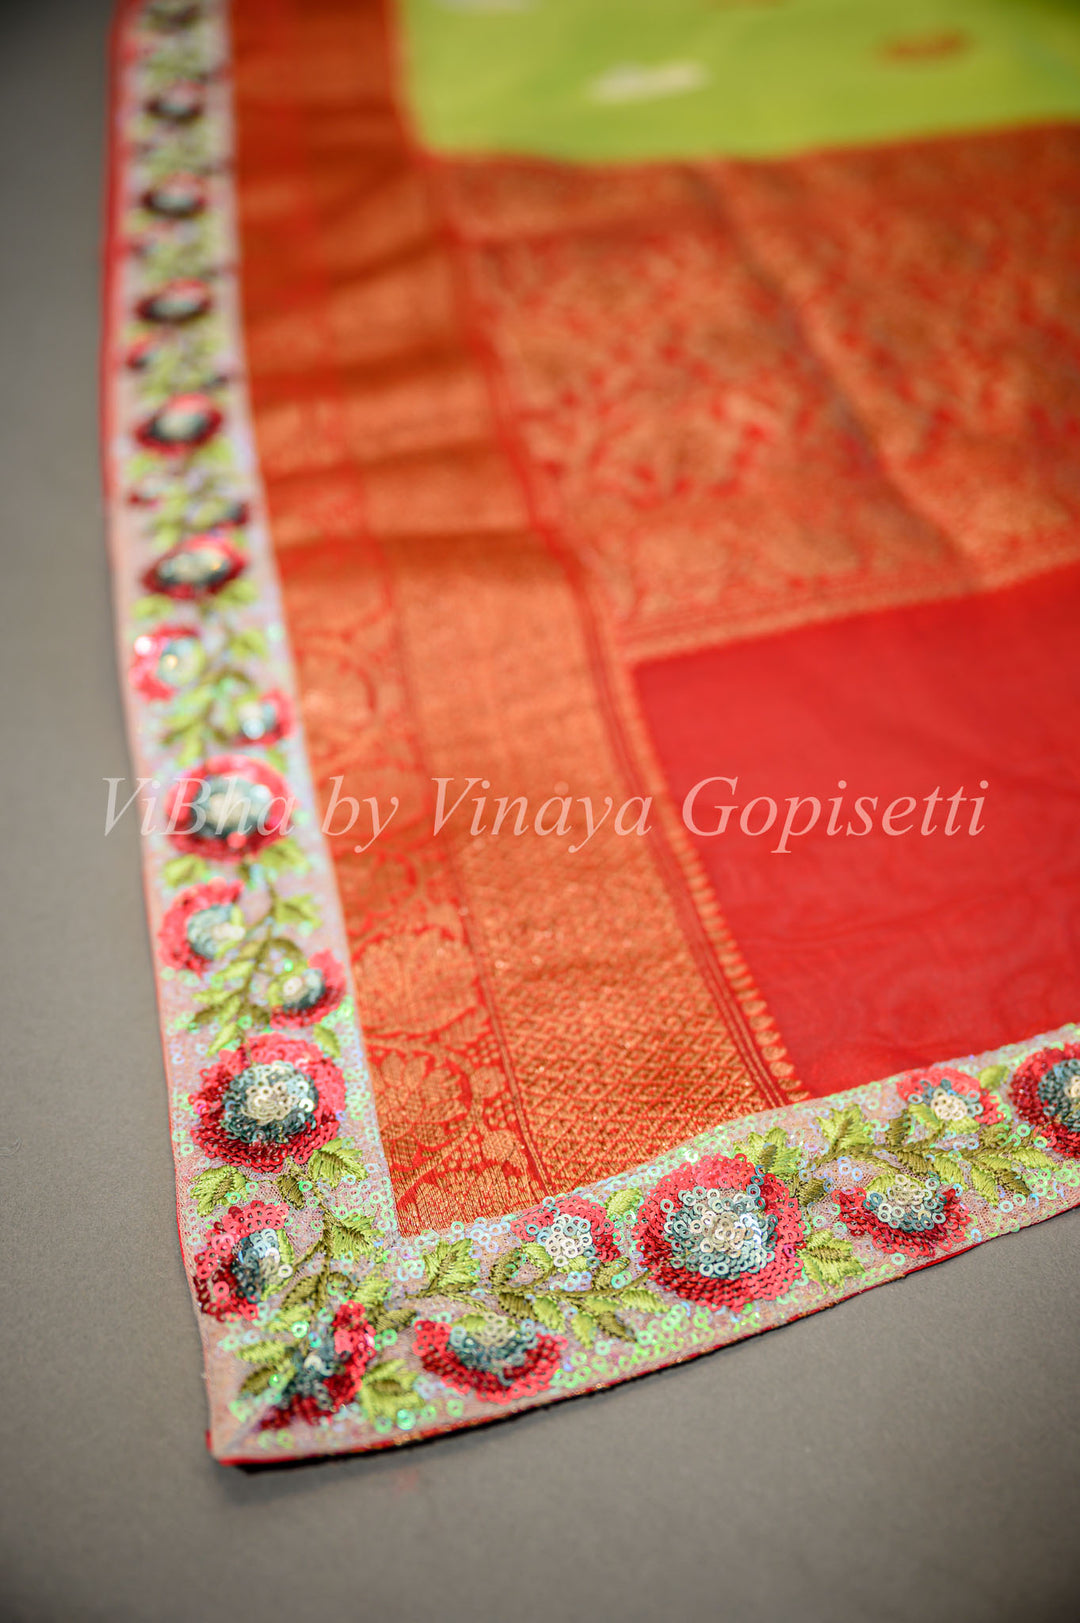 Parrot Green and Red Banarasi Organza Saree Embellished With Embroidered Borders